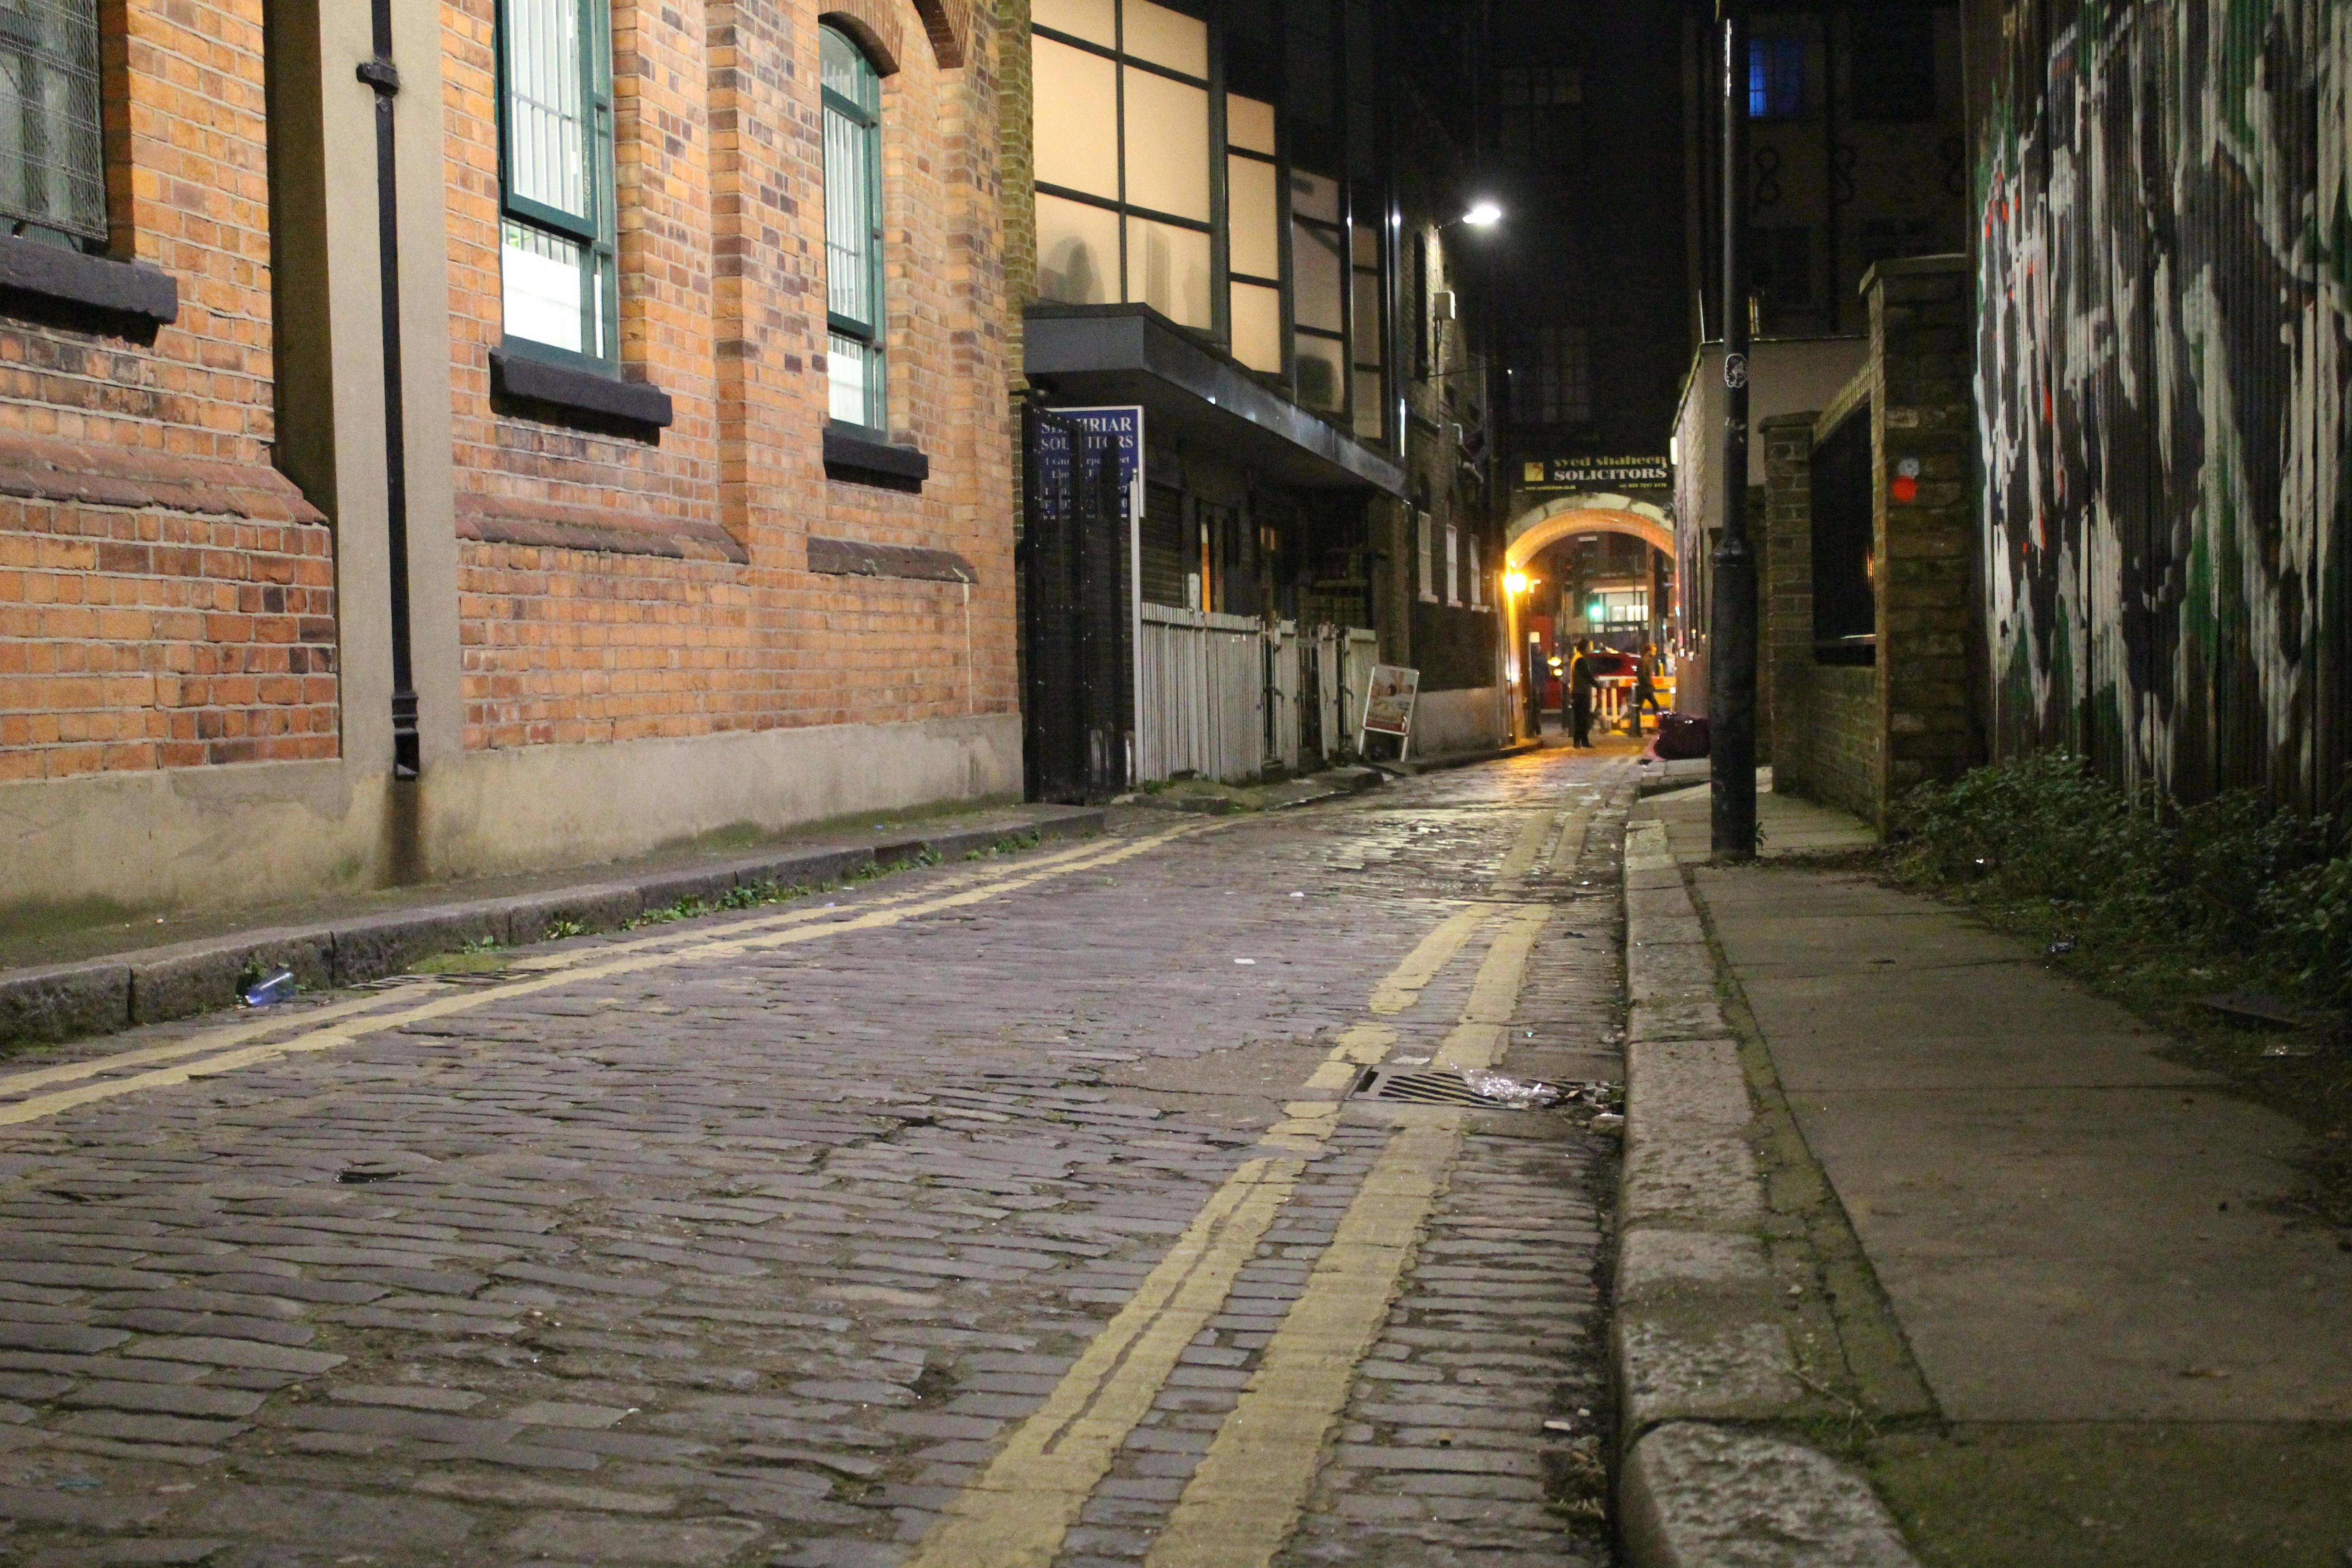 Jack the Ripper walking tour of London